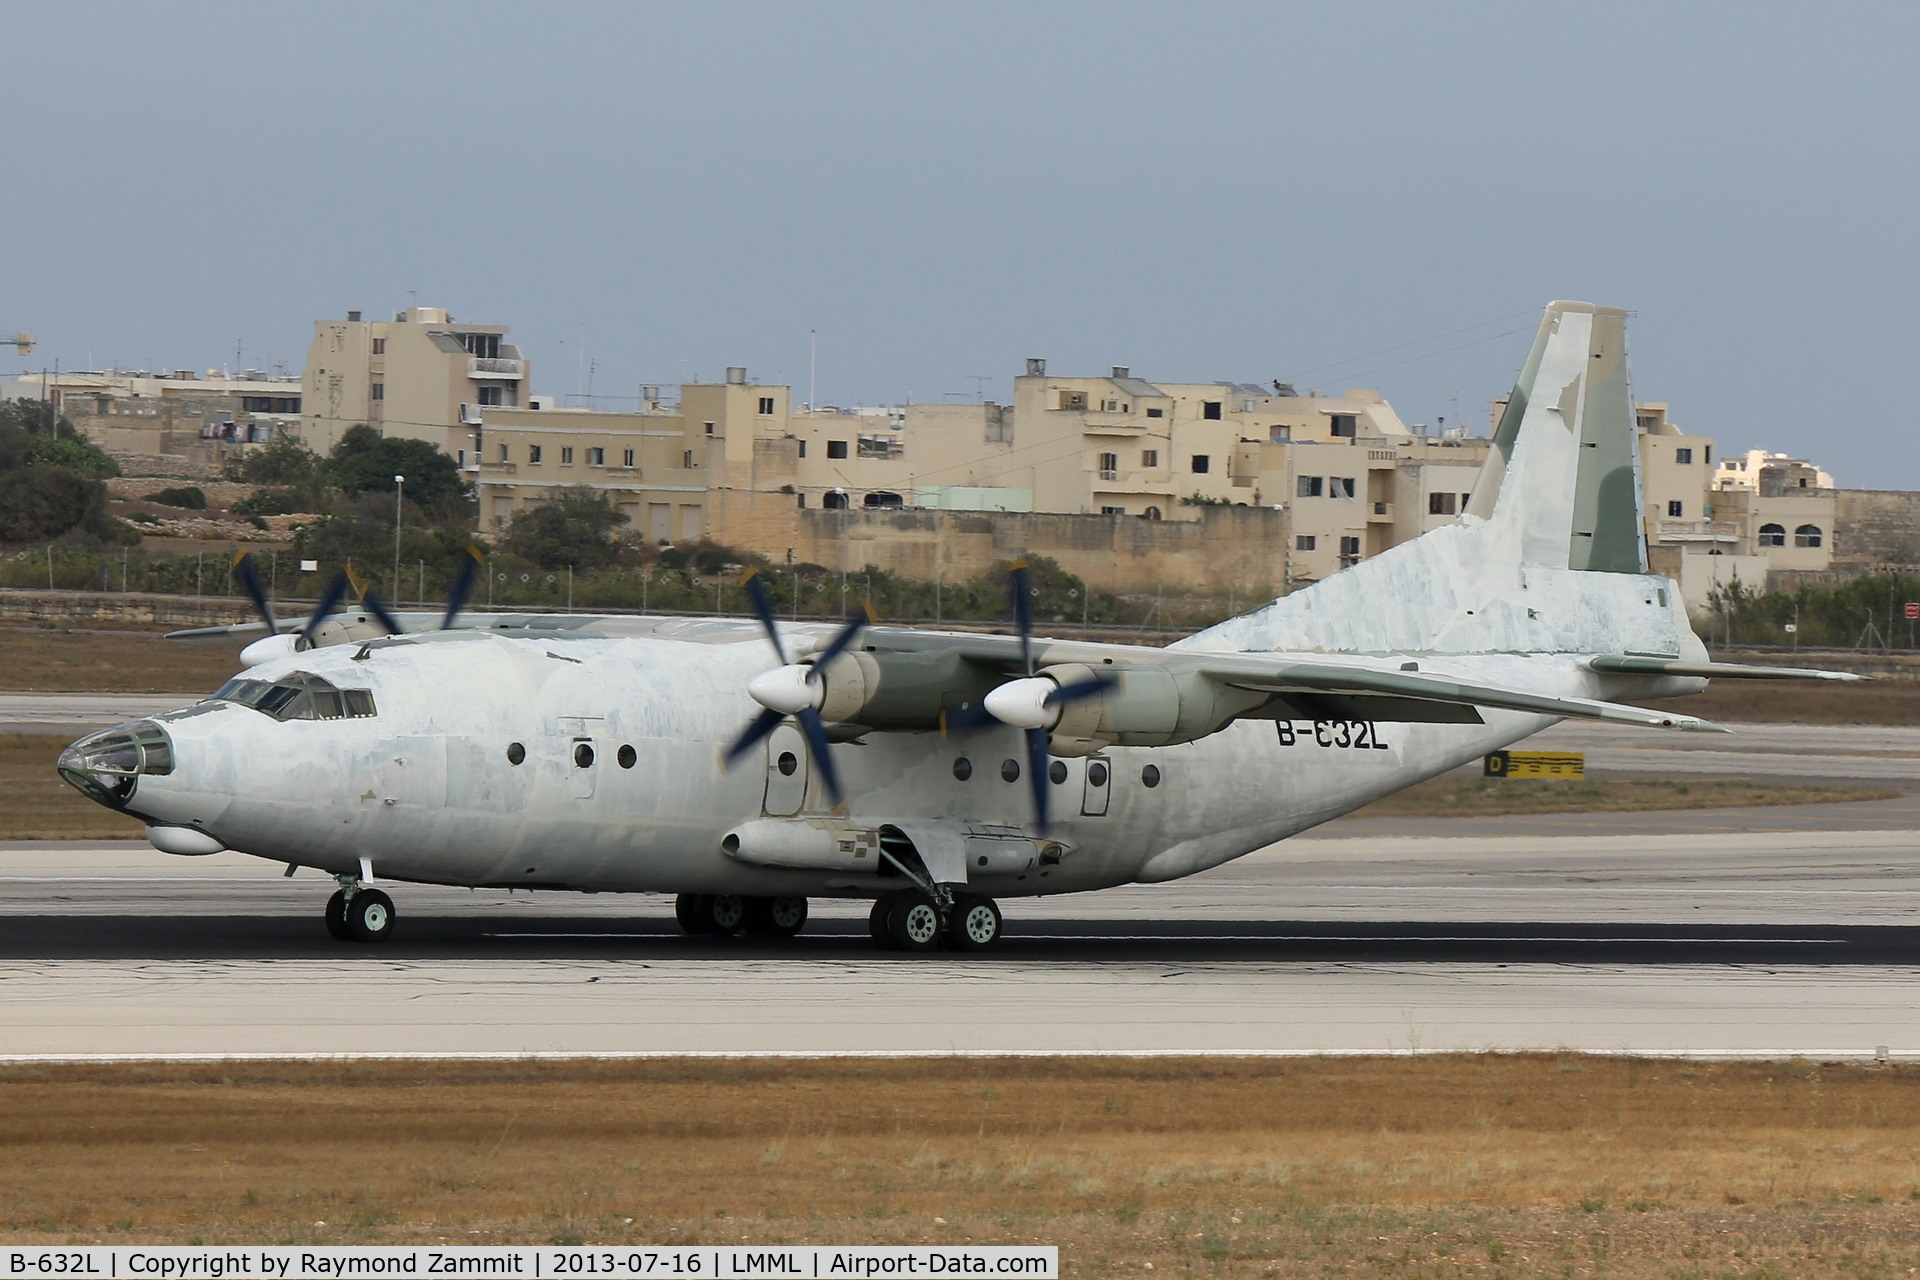 B-632L, Shaanxi Y-8F-200W Pegasus C/N 371804, Shaanxi Y-8 B-632L of Venezuelian Air Force staged in Malta during its delivery to the Venezuelian Air Force.Very rare!!!